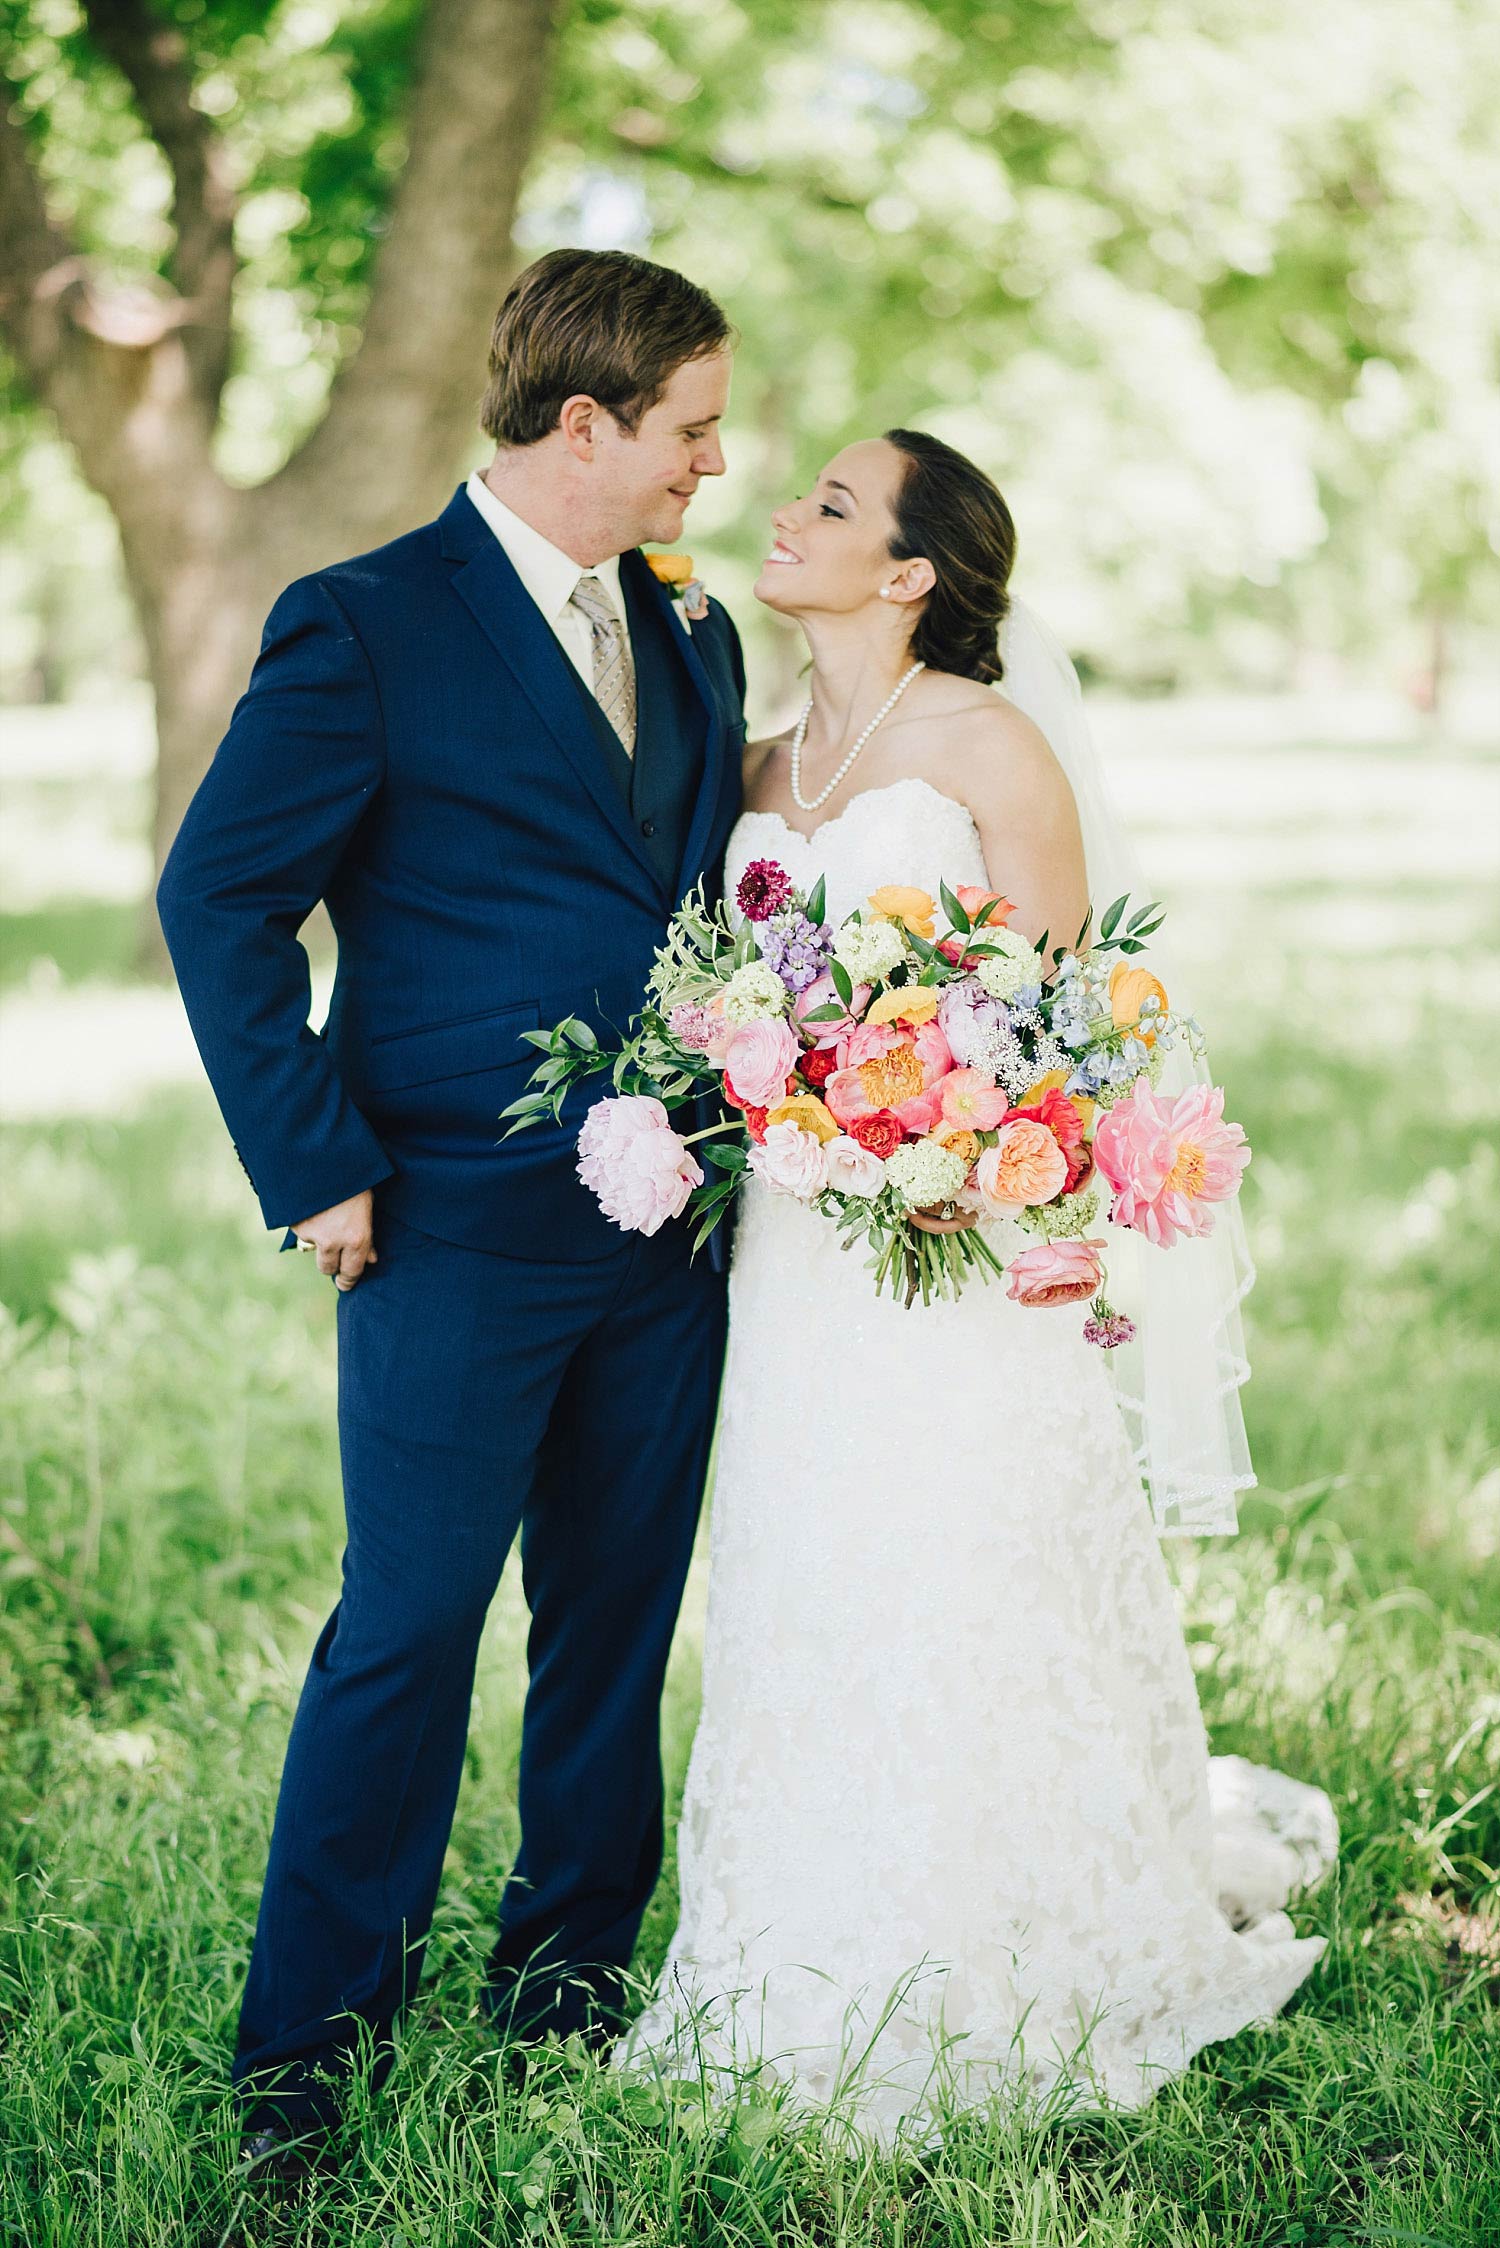 The Orchard Azle wedding bride with colorful bridal bouquet kissing groom